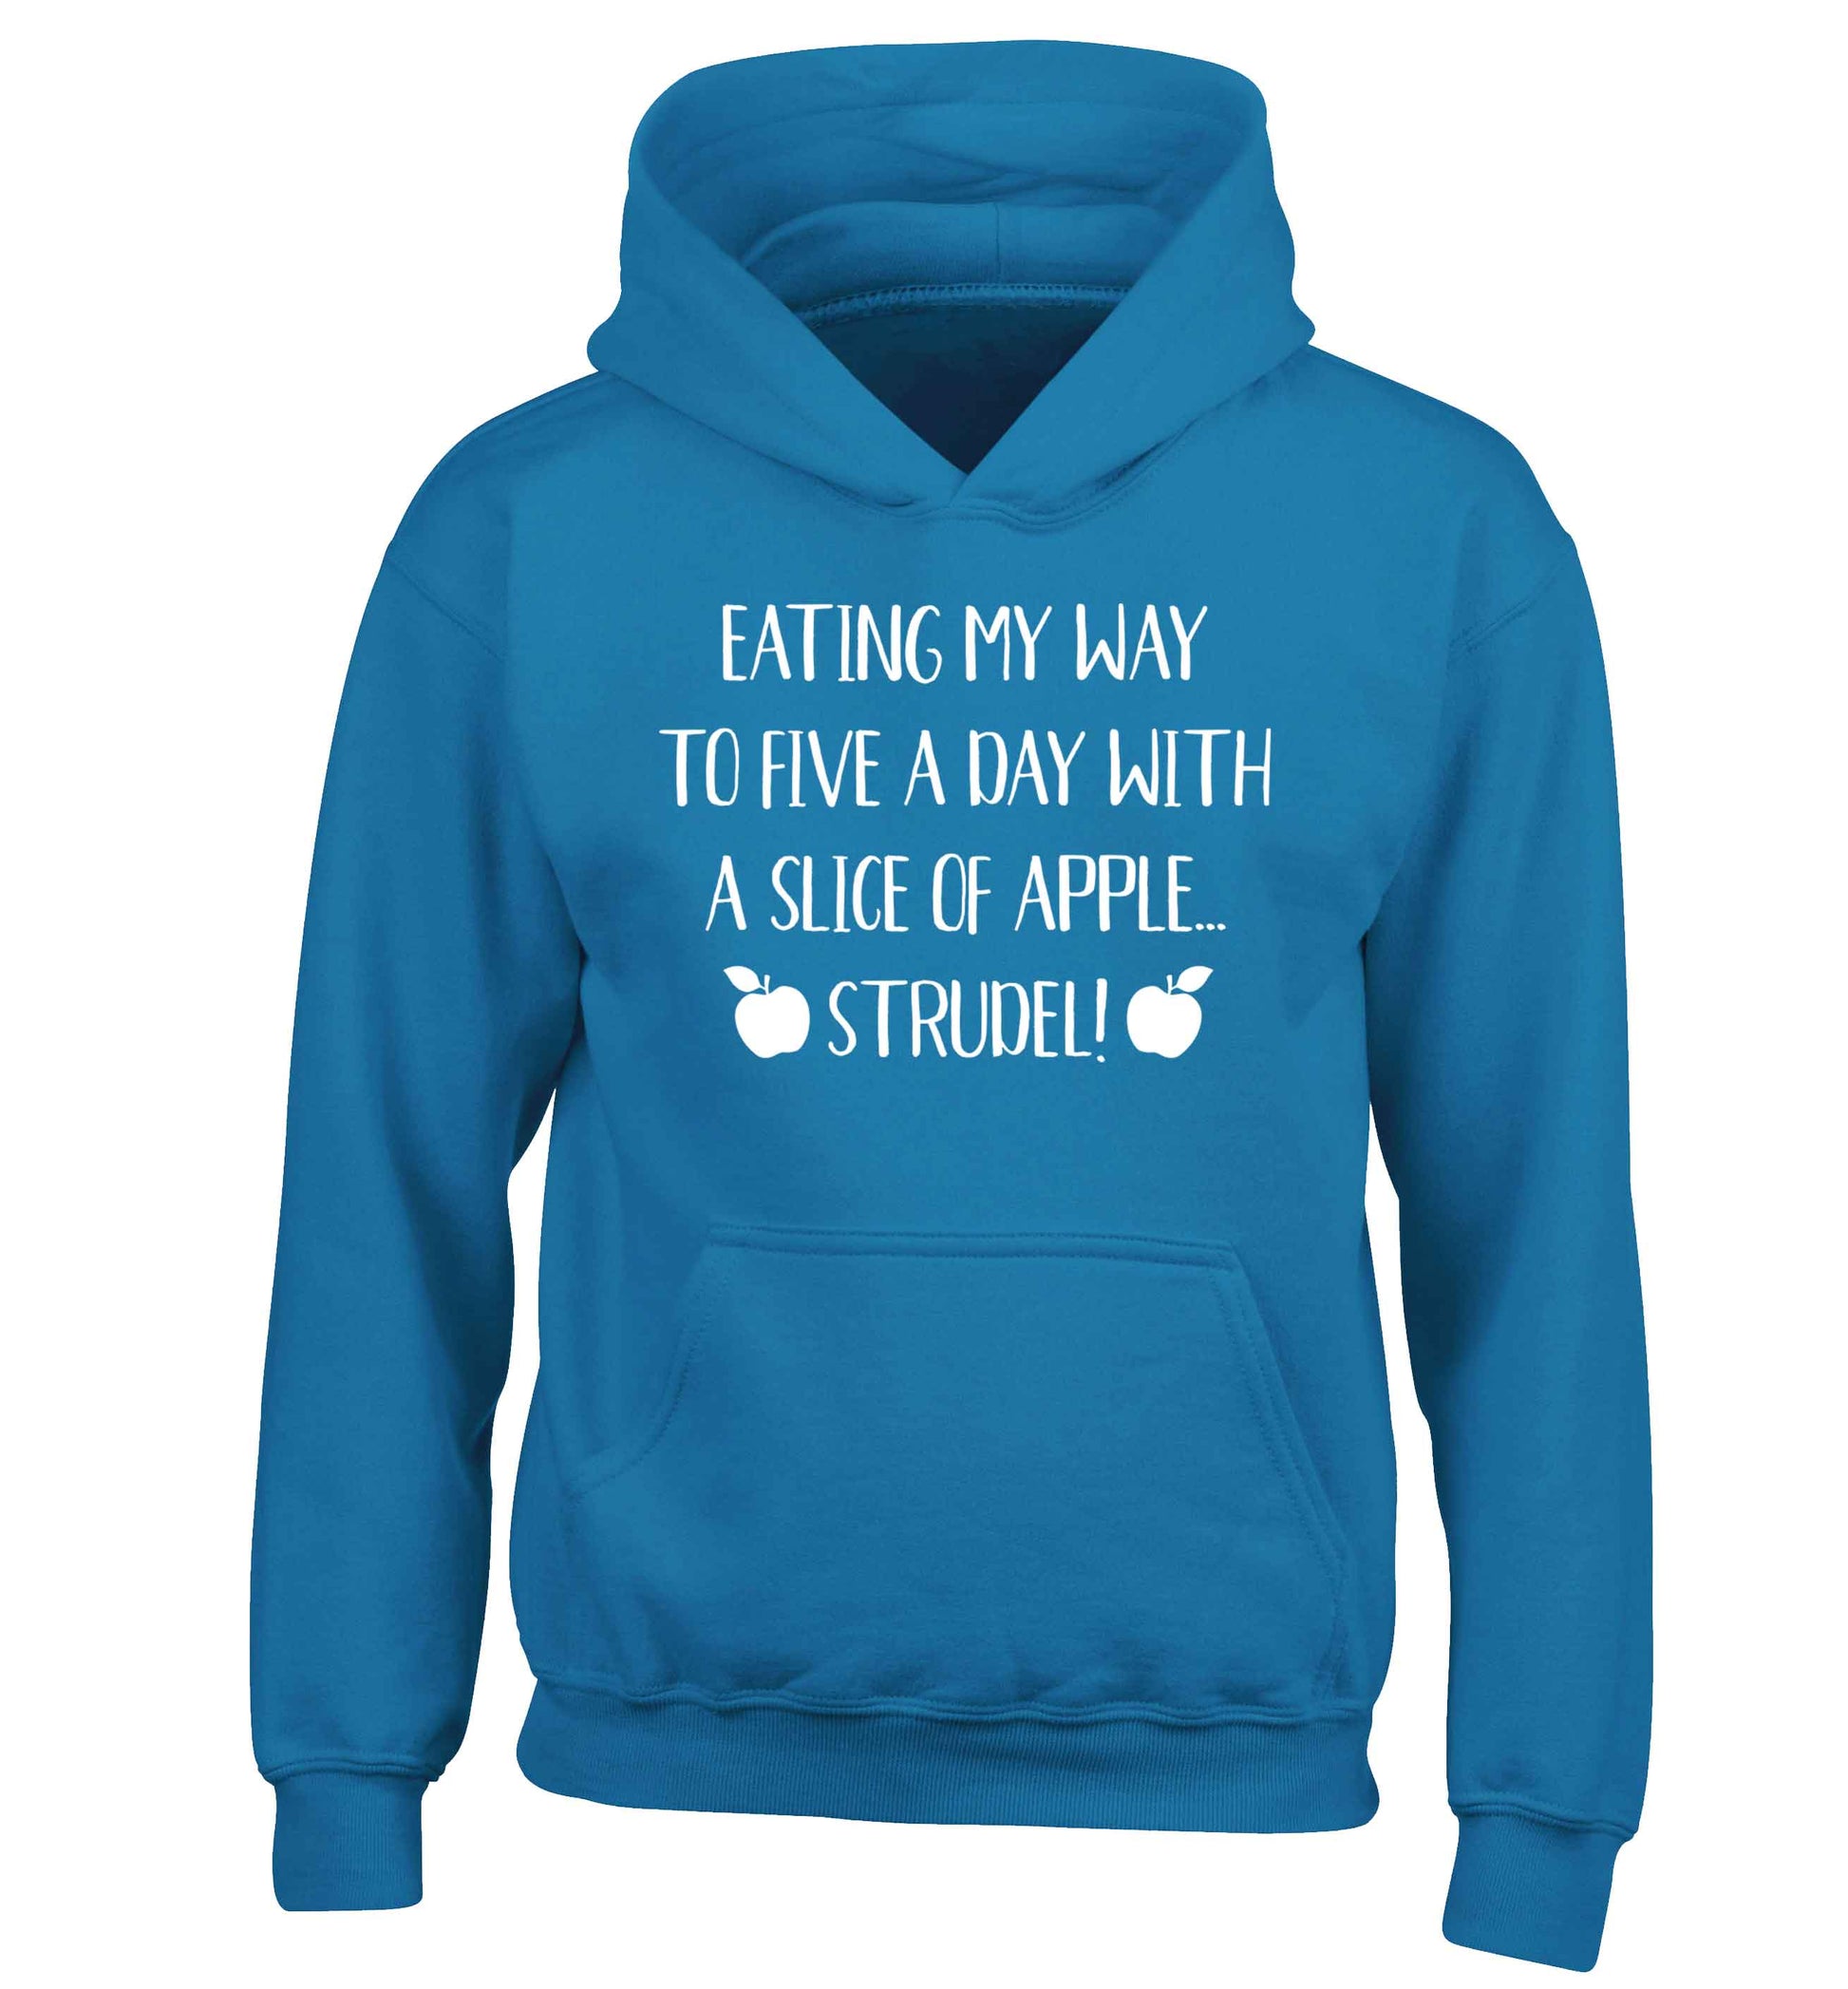 Eating my way to five a day with a slice of apple strudel children's blue hoodie 12-13 Years